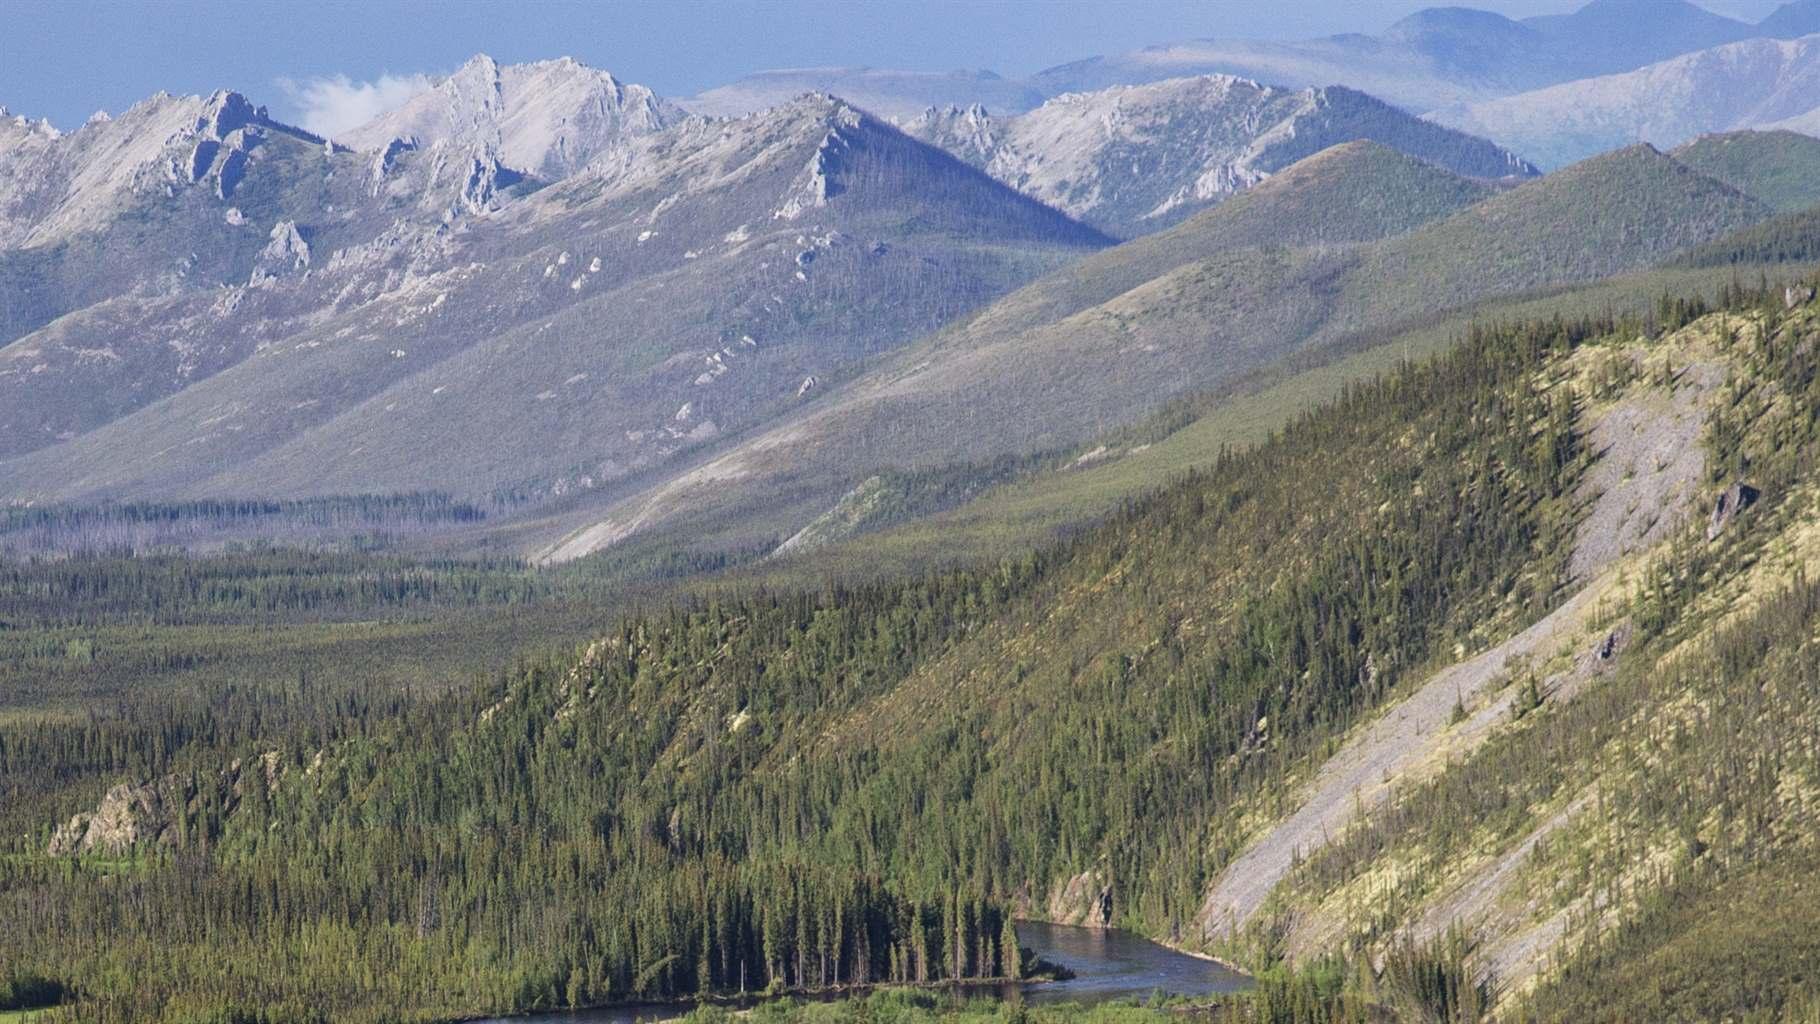 A blue river meanders through a broad valley of evergreen forest, with patches of open land, as large mountains rise around it on a sunny day. The mountains in the background have rocky peaks above the tree line, and some are snowcapped.